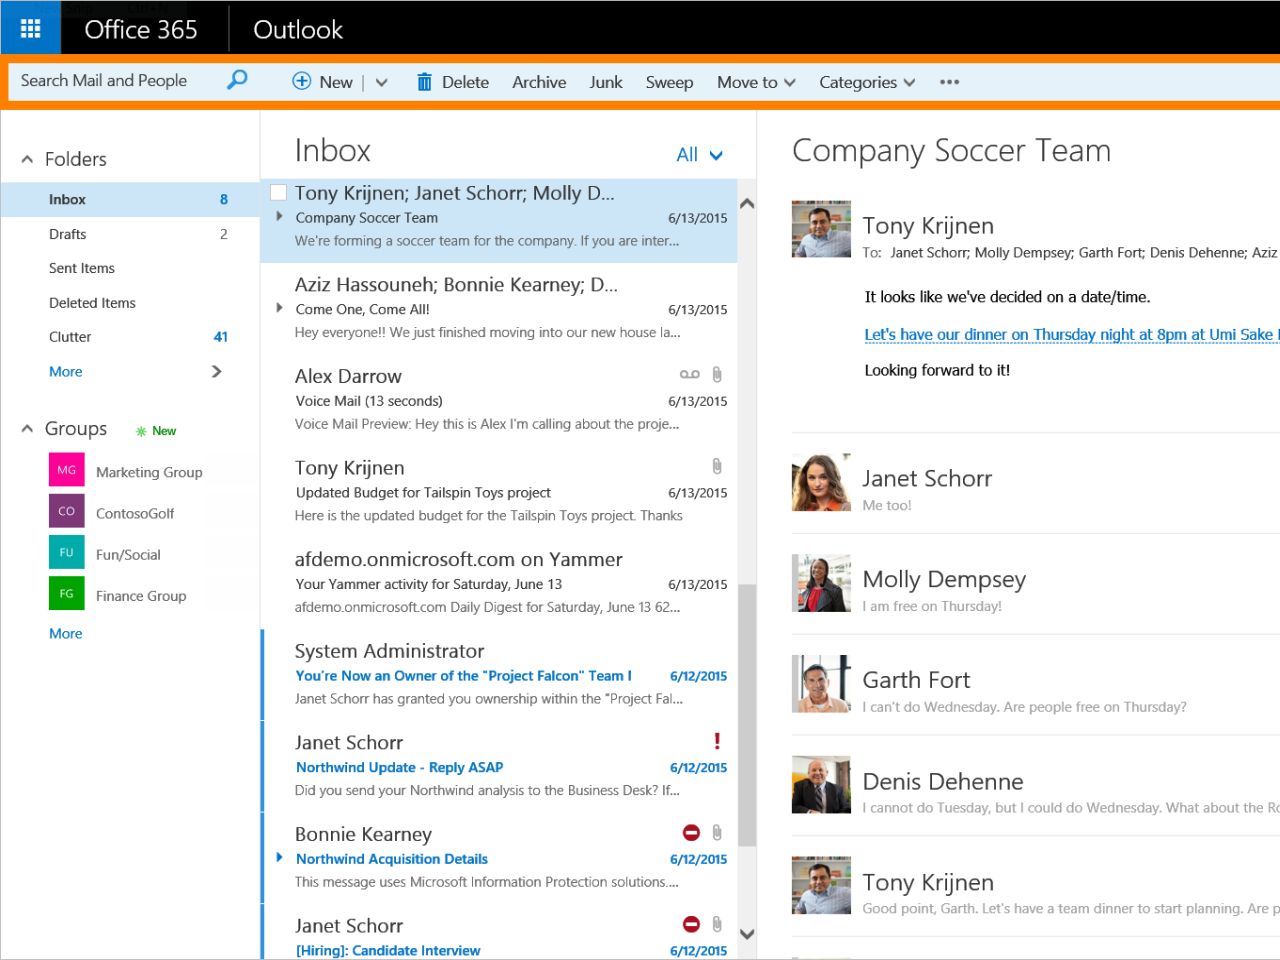 web-version-of-outlook-for-office-365-business-users-gets-a-new-ui-and